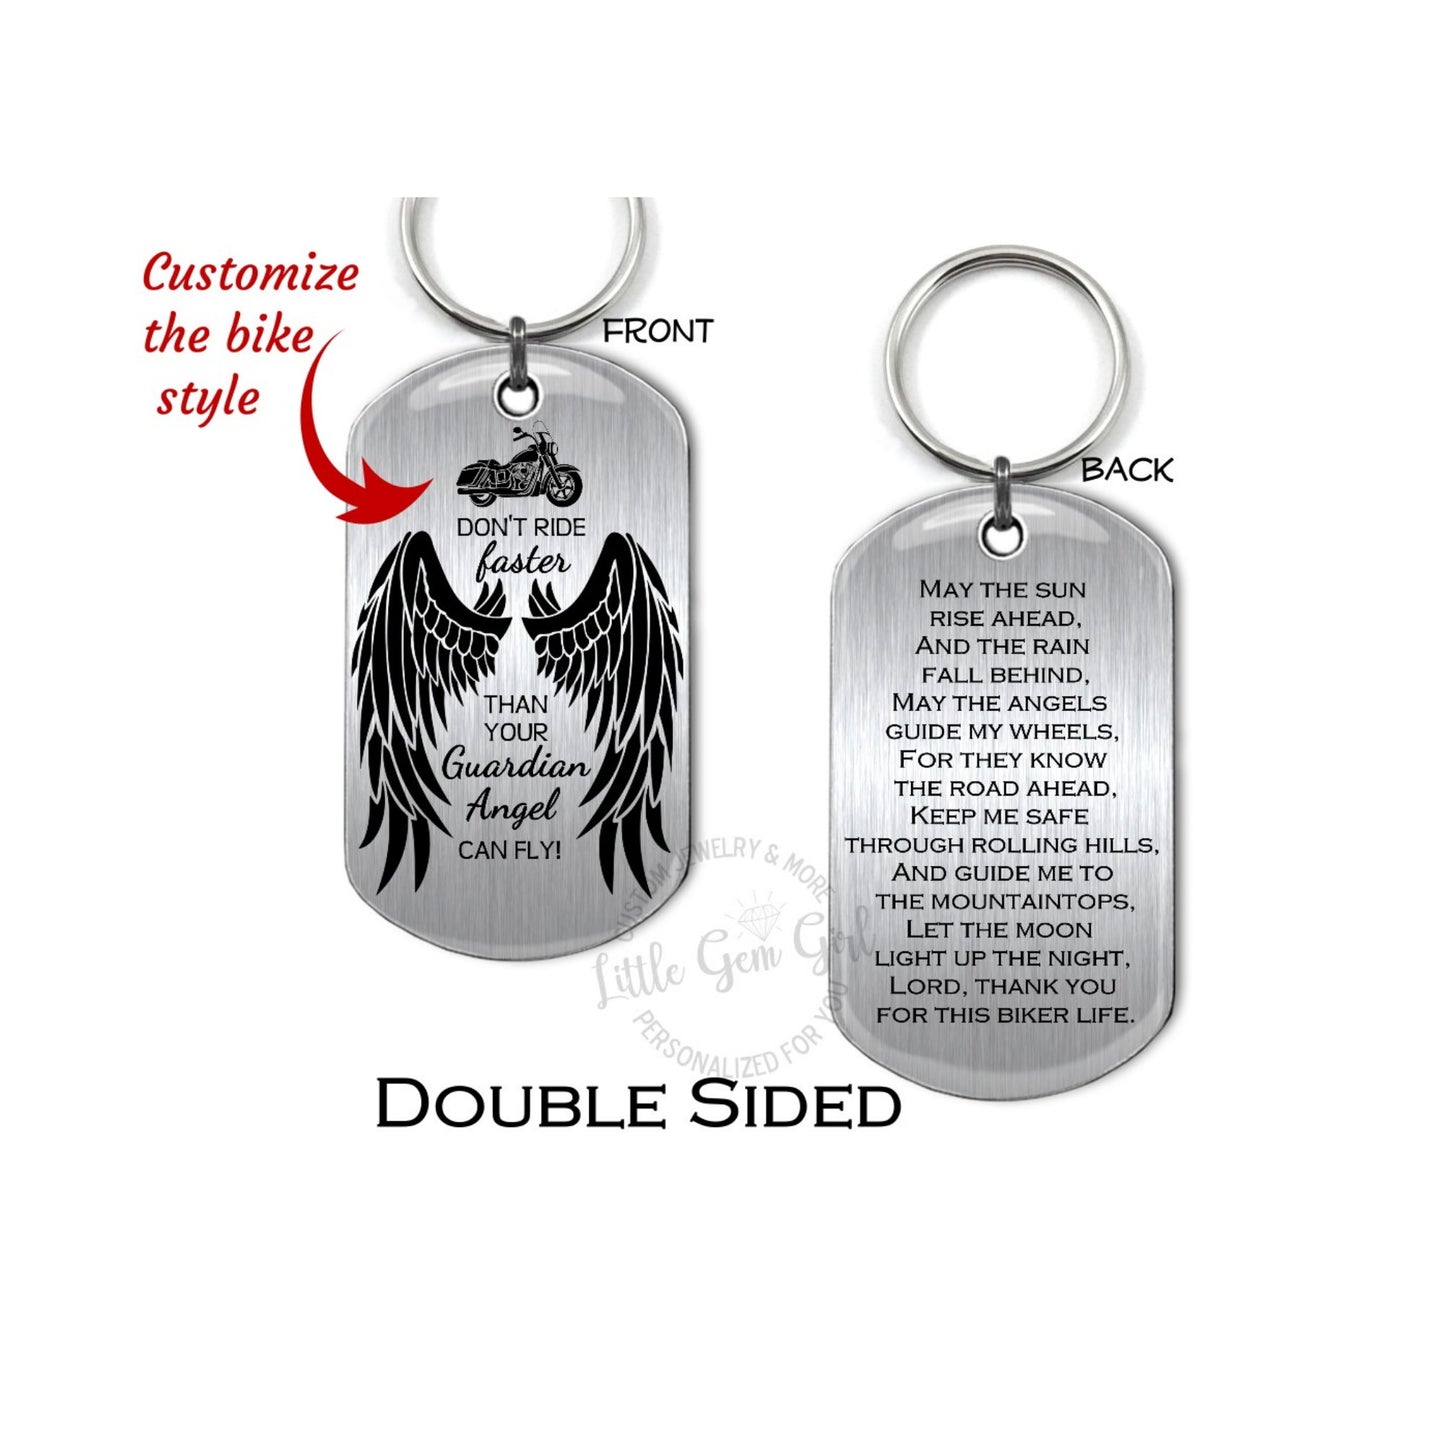 Biker Prayer for Motorcycle Riders Double Sided Dog Tag - Guardian Angel Key Chain or Necklace - Safe Driving Keepsake Unisex